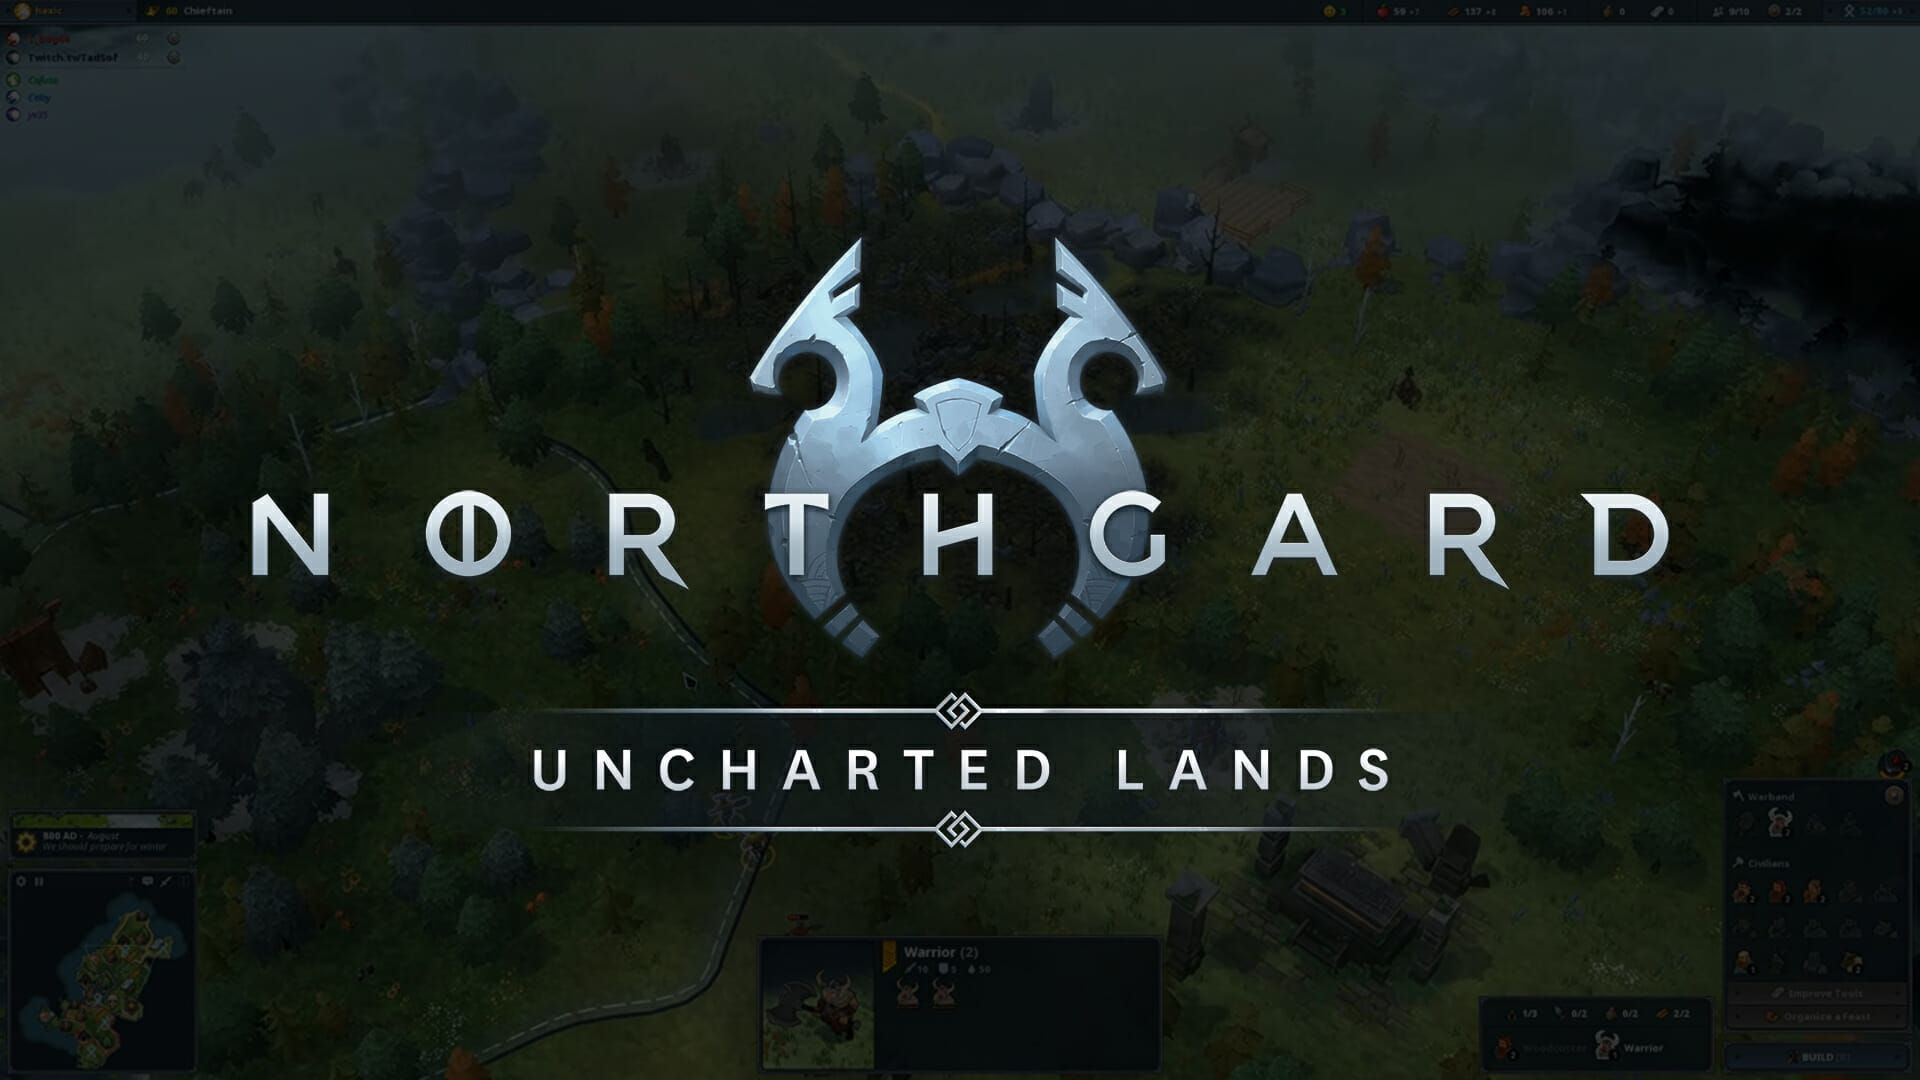 Vikings discovered new lands full of mystery, danger and riches NORTHGARD